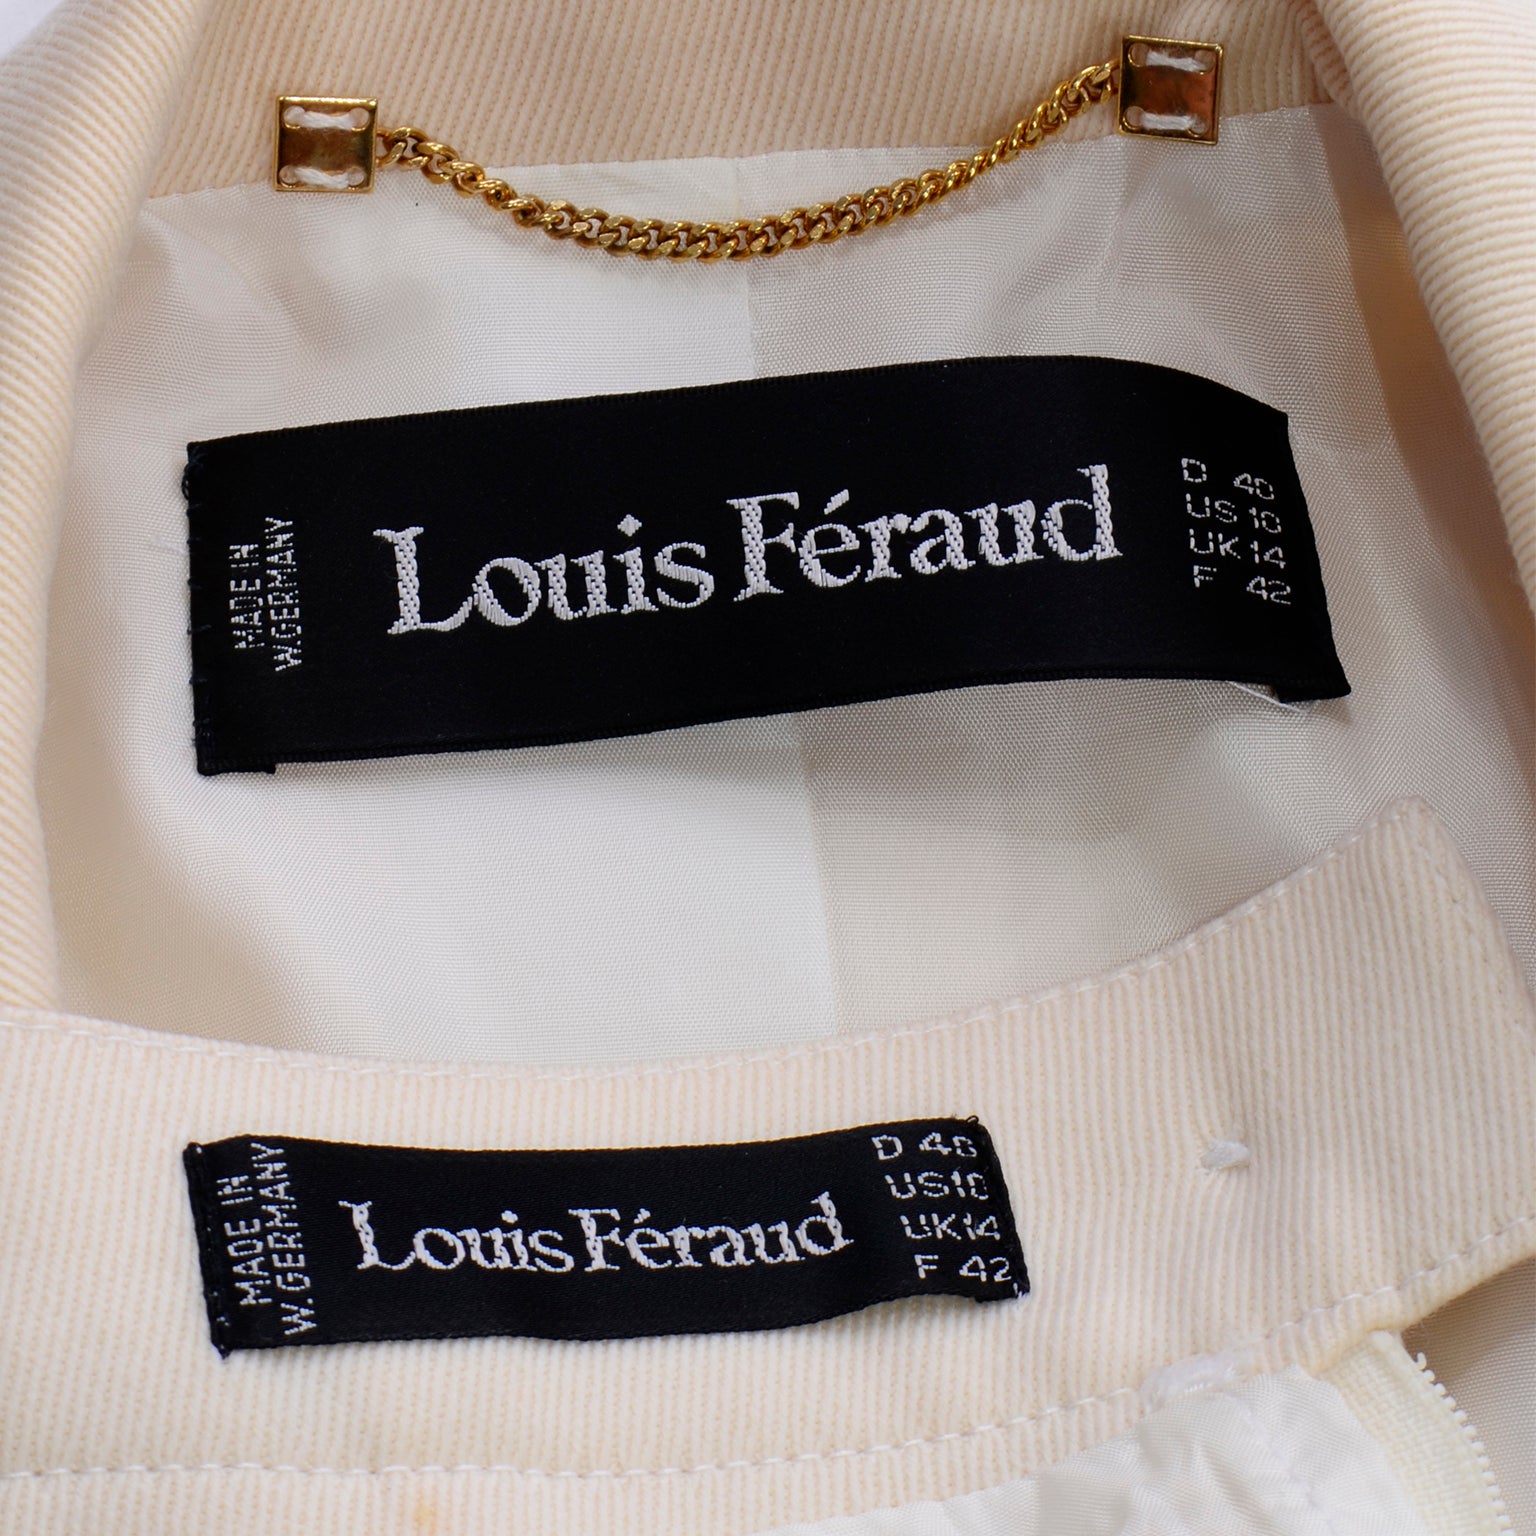 Shop at a Discounted Prices from Louis Feraud